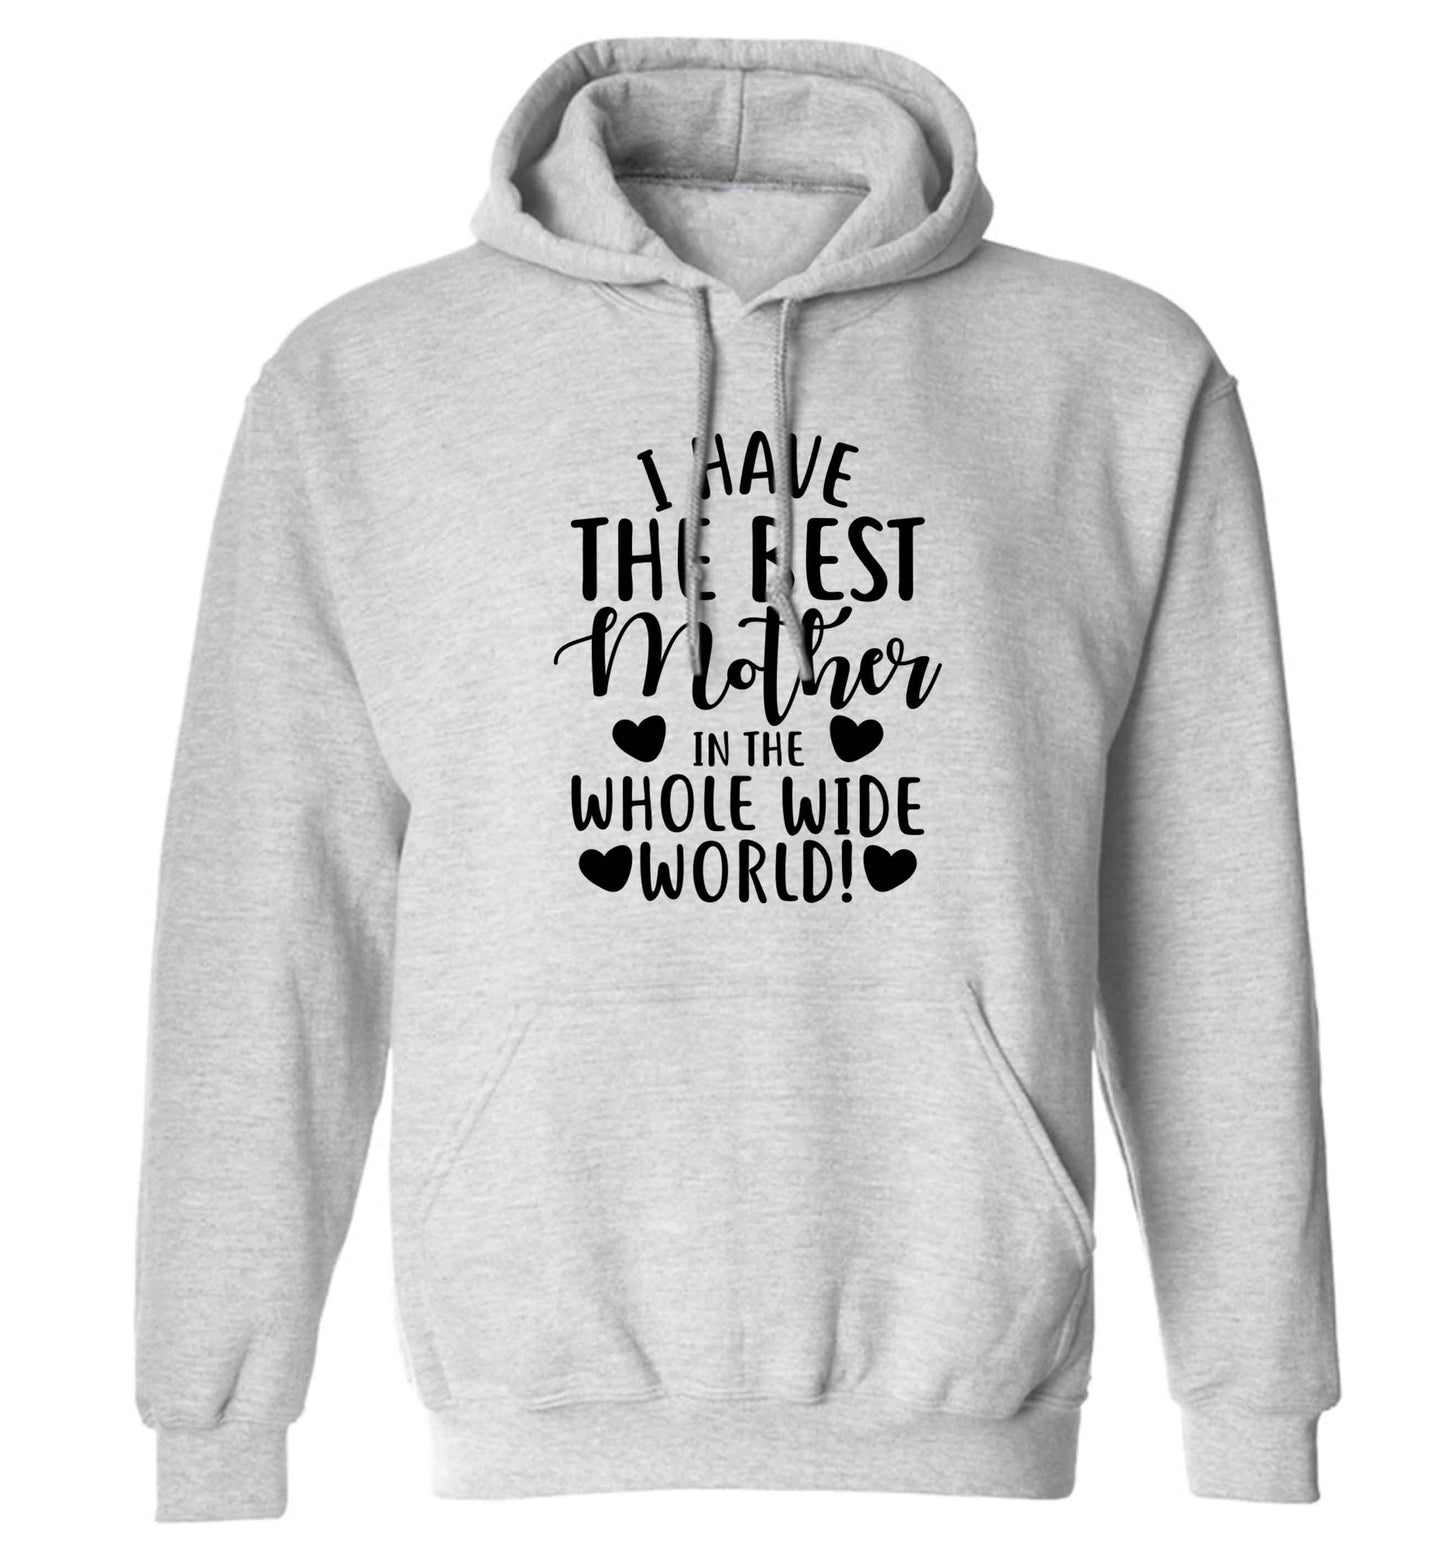 I have the best mother in the whole wide world adults unisex grey hoodie 2XL